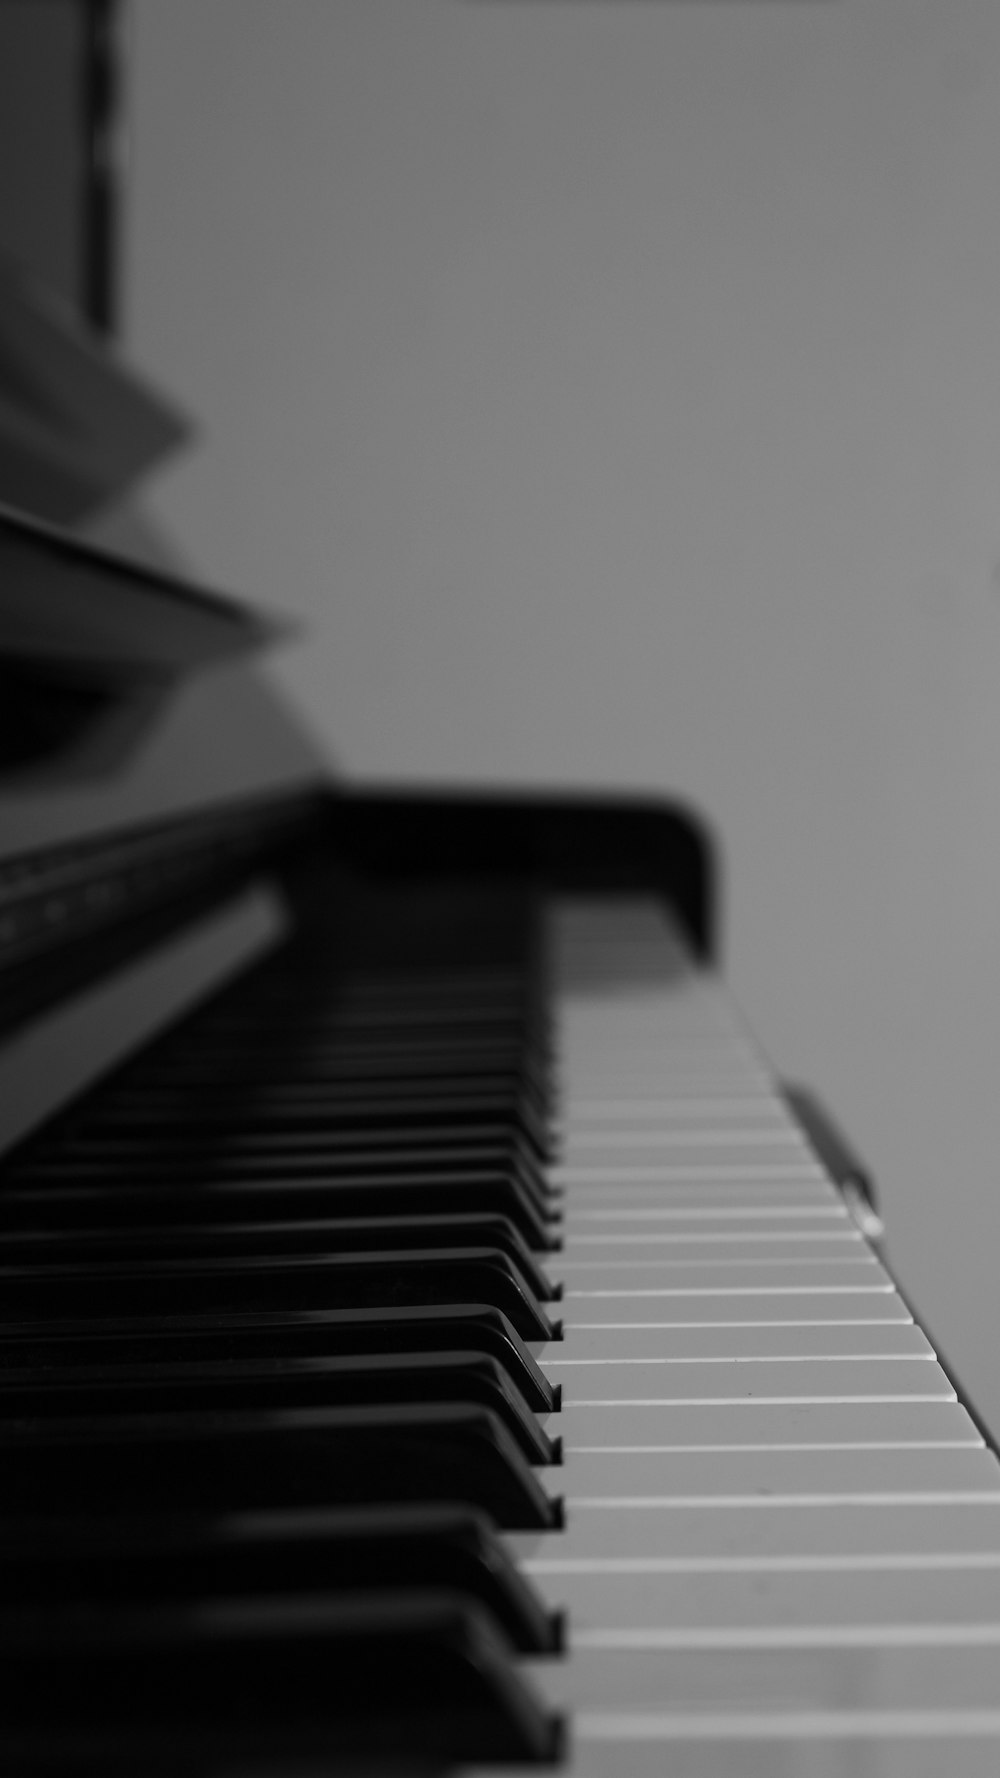 a close-up of a piano